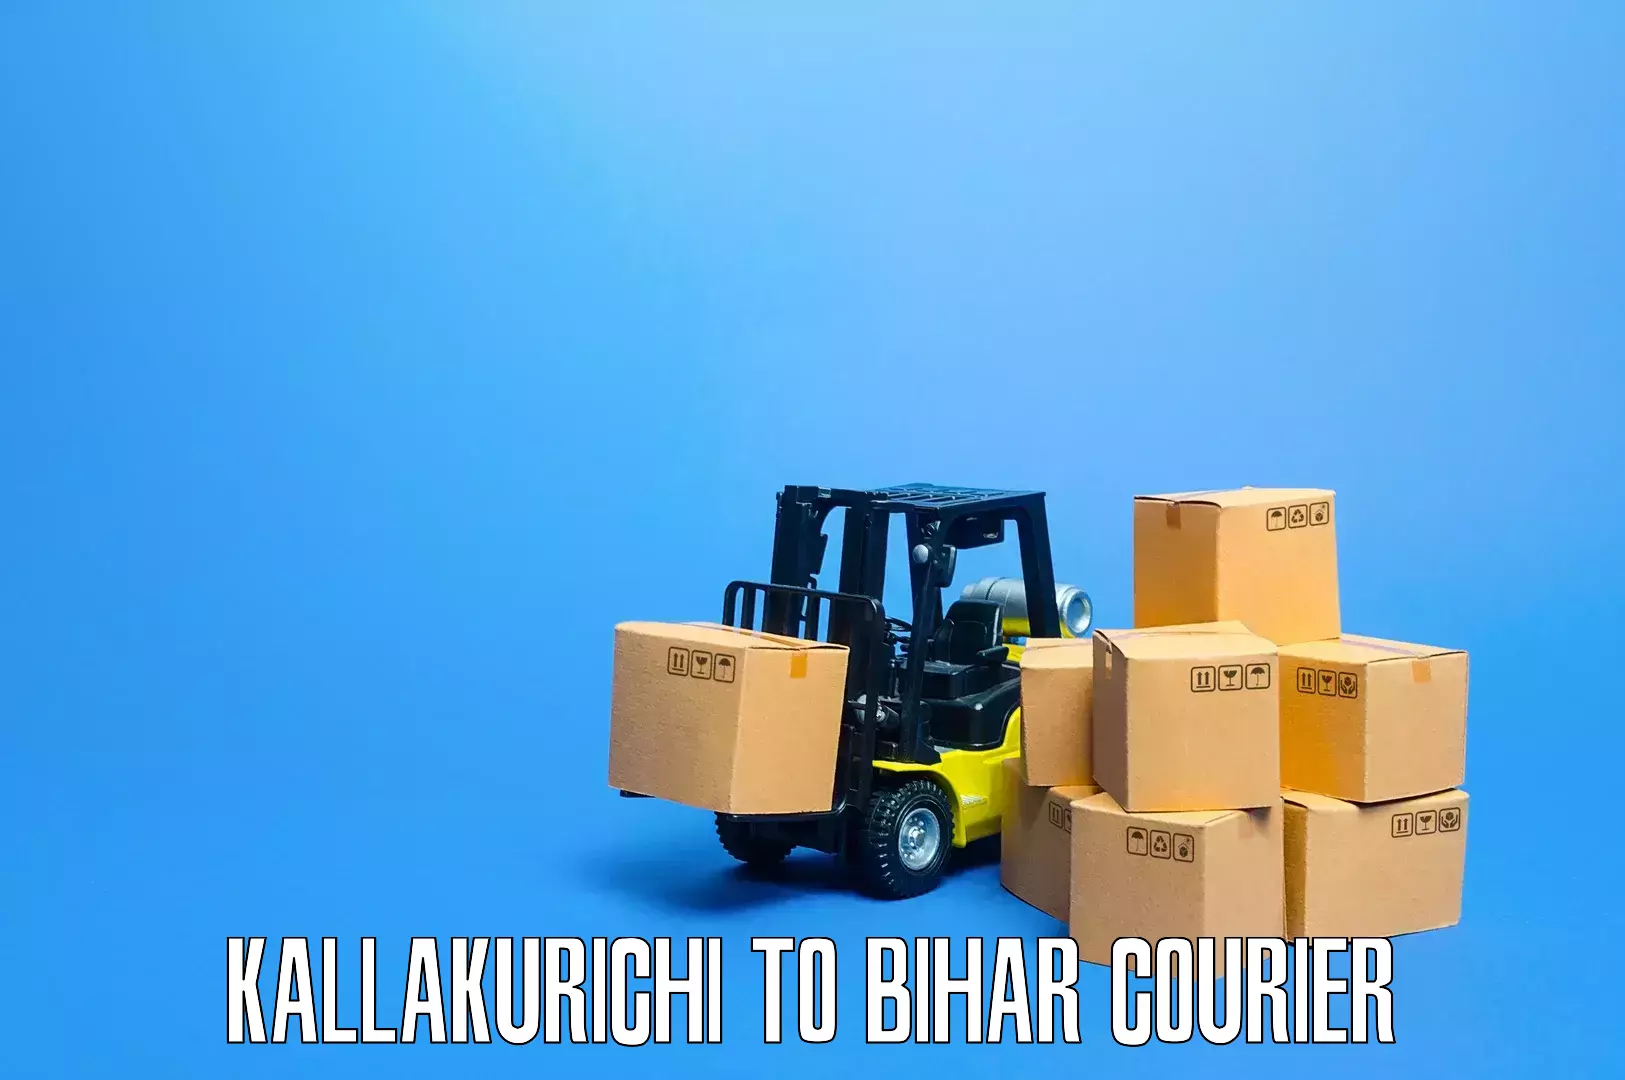 Quality relocation services in Kallakurichi to Siwan